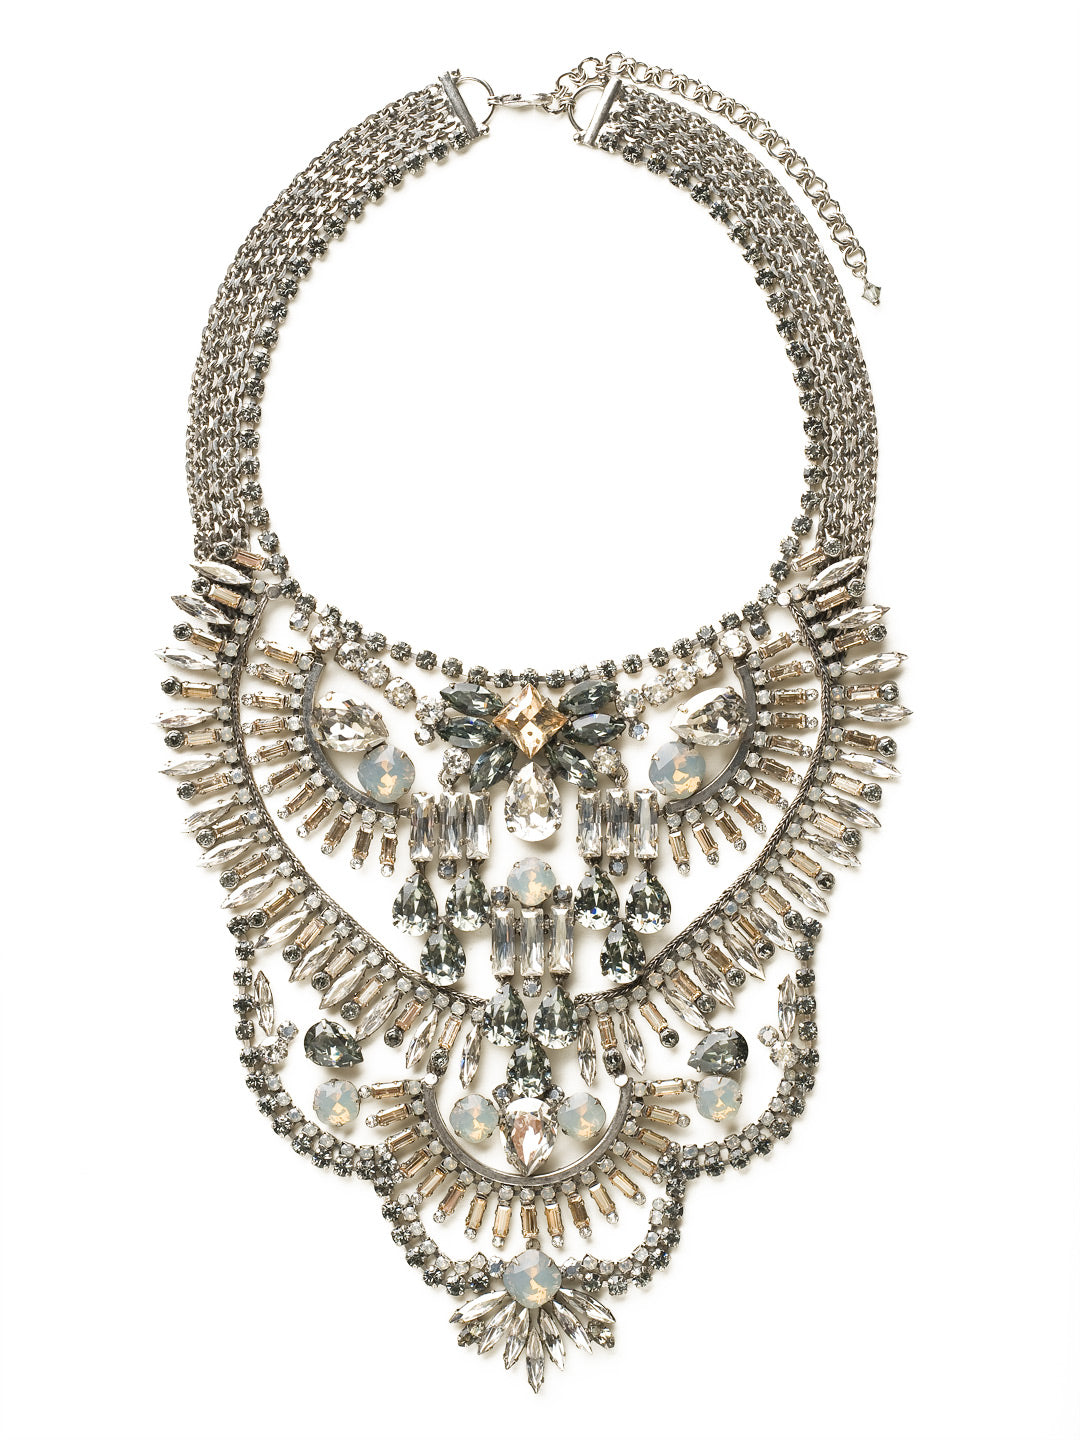 Crystal Collage Statement Necklace - NSP81ASGNS - This necklace features small, symmetrical crystals that radiate throughout each layer to create a beautiful textured collage. From Sorrelli's Golden Shadow collection in our Antique Silver-tone finish.